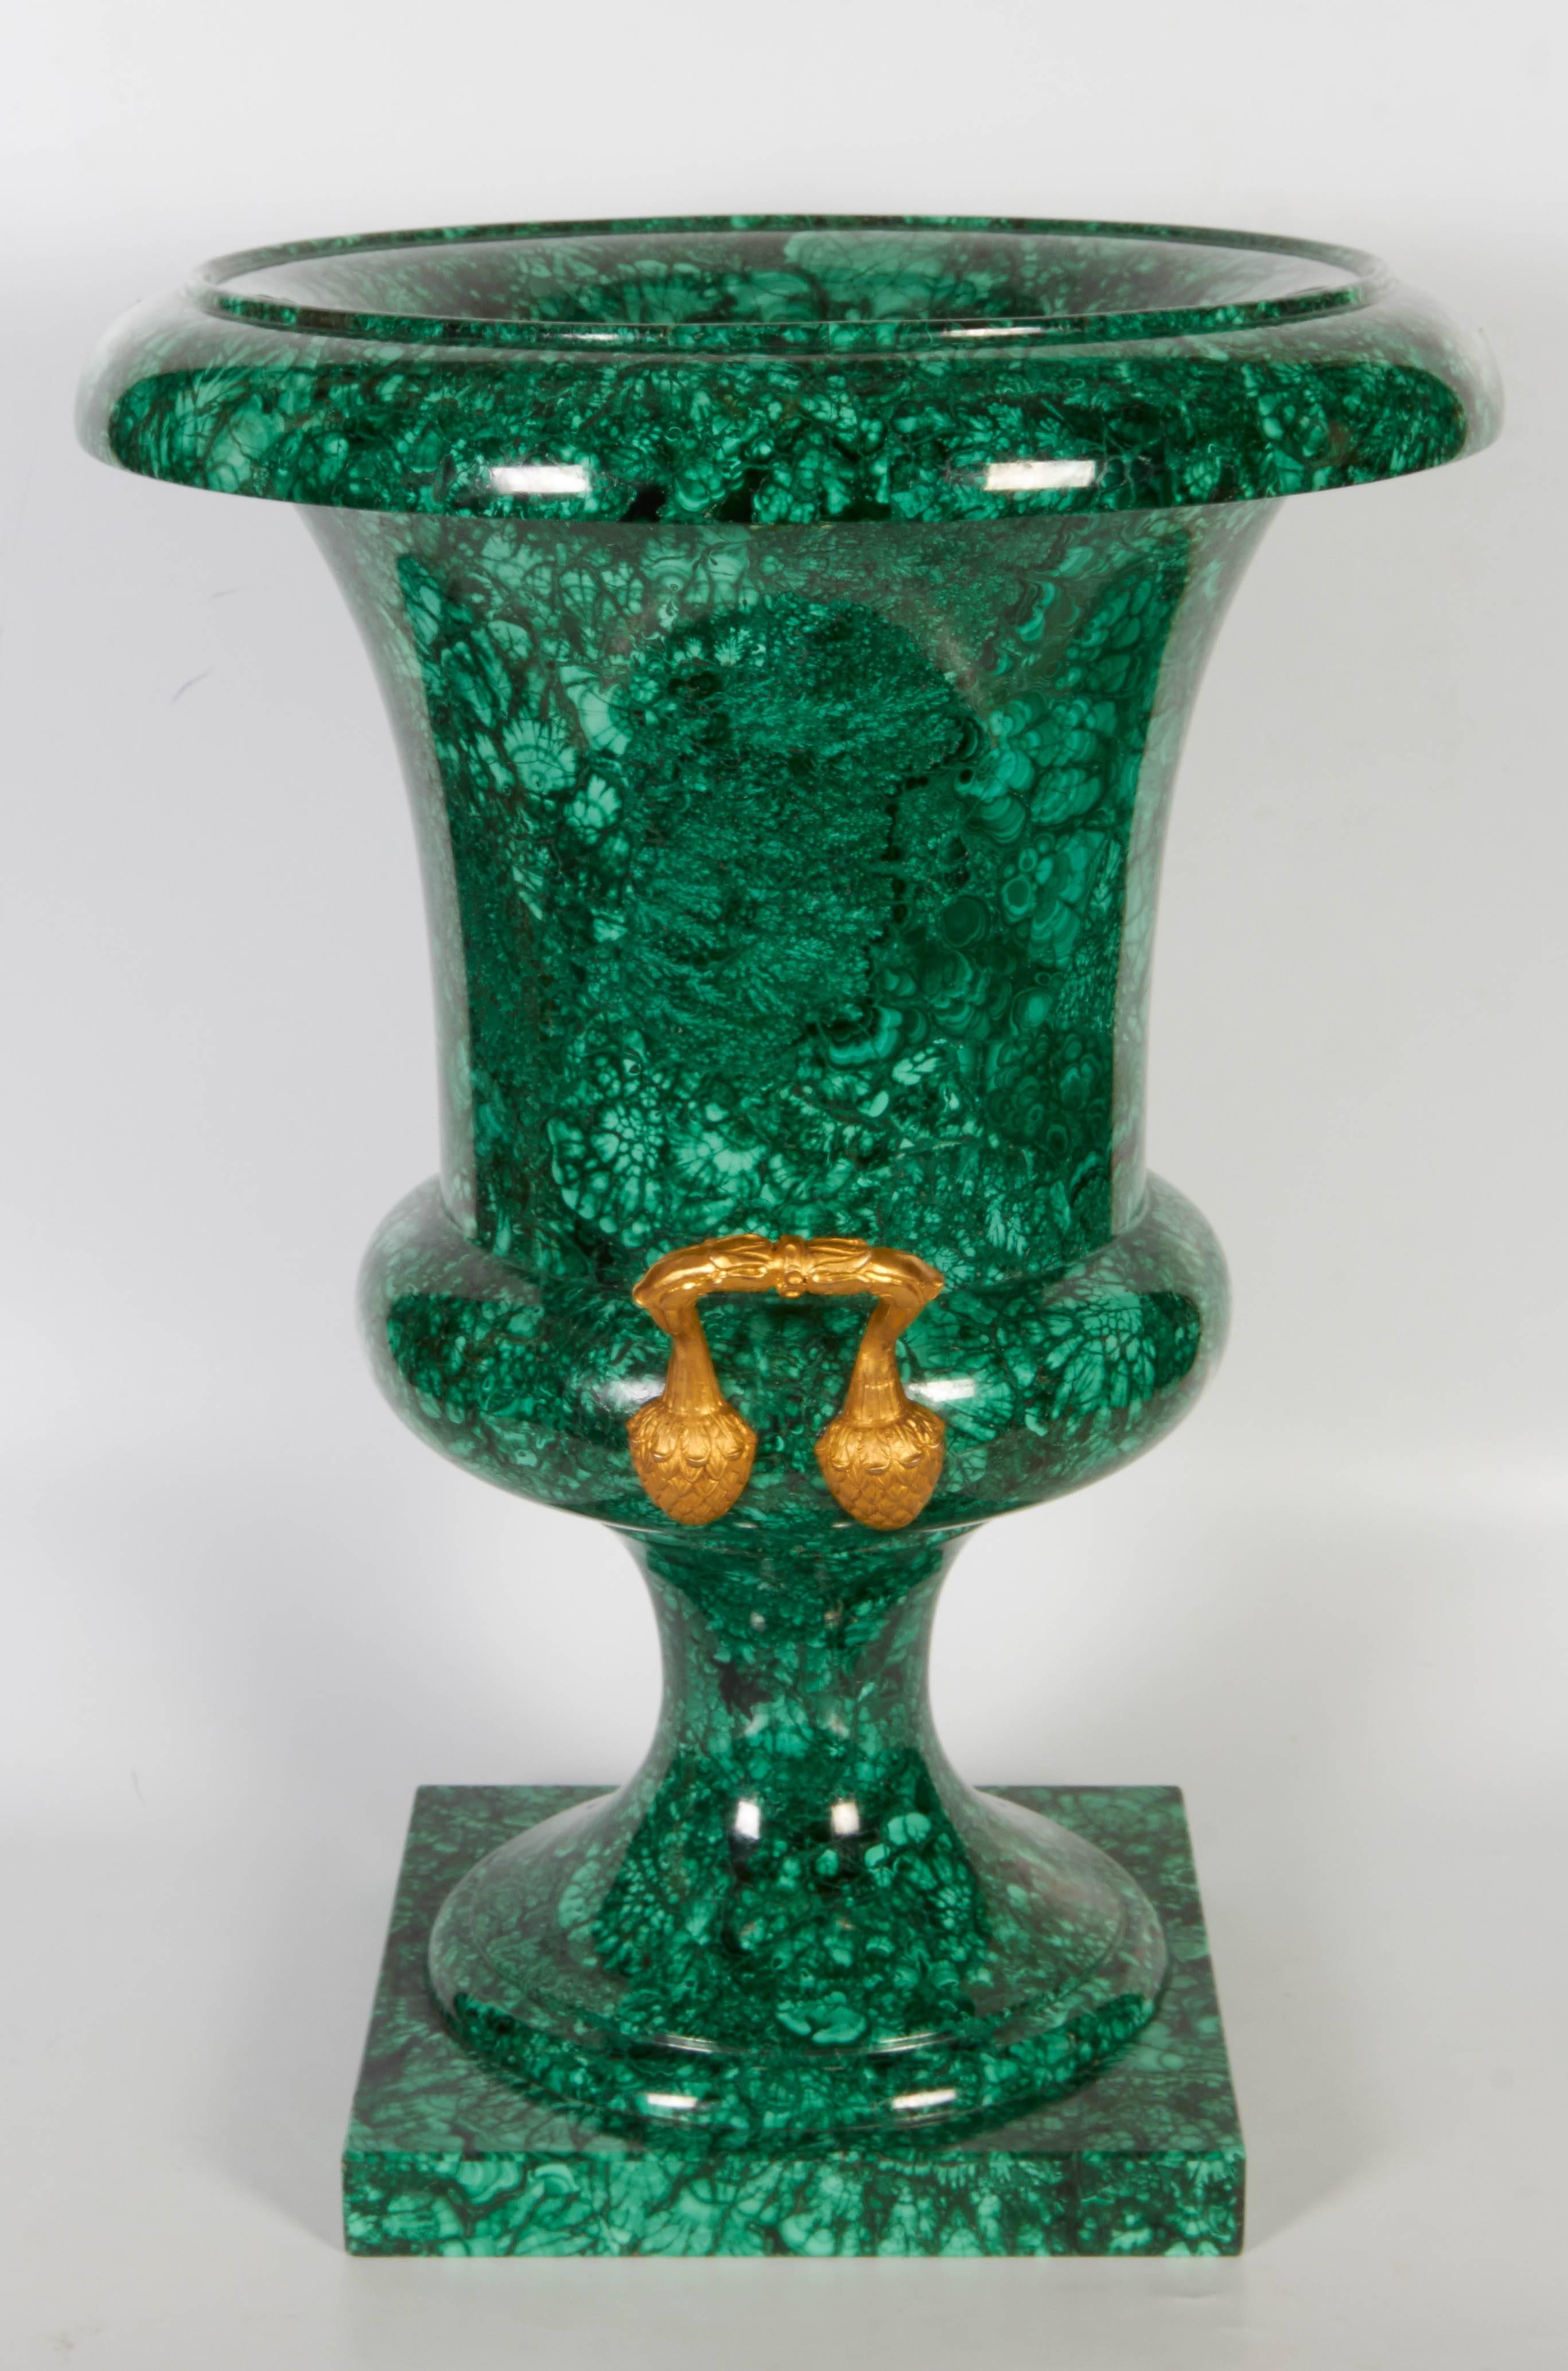 European Large Russian Neoclassical Malachite and Ormolu Urn or Vase, 19th Century For Sale